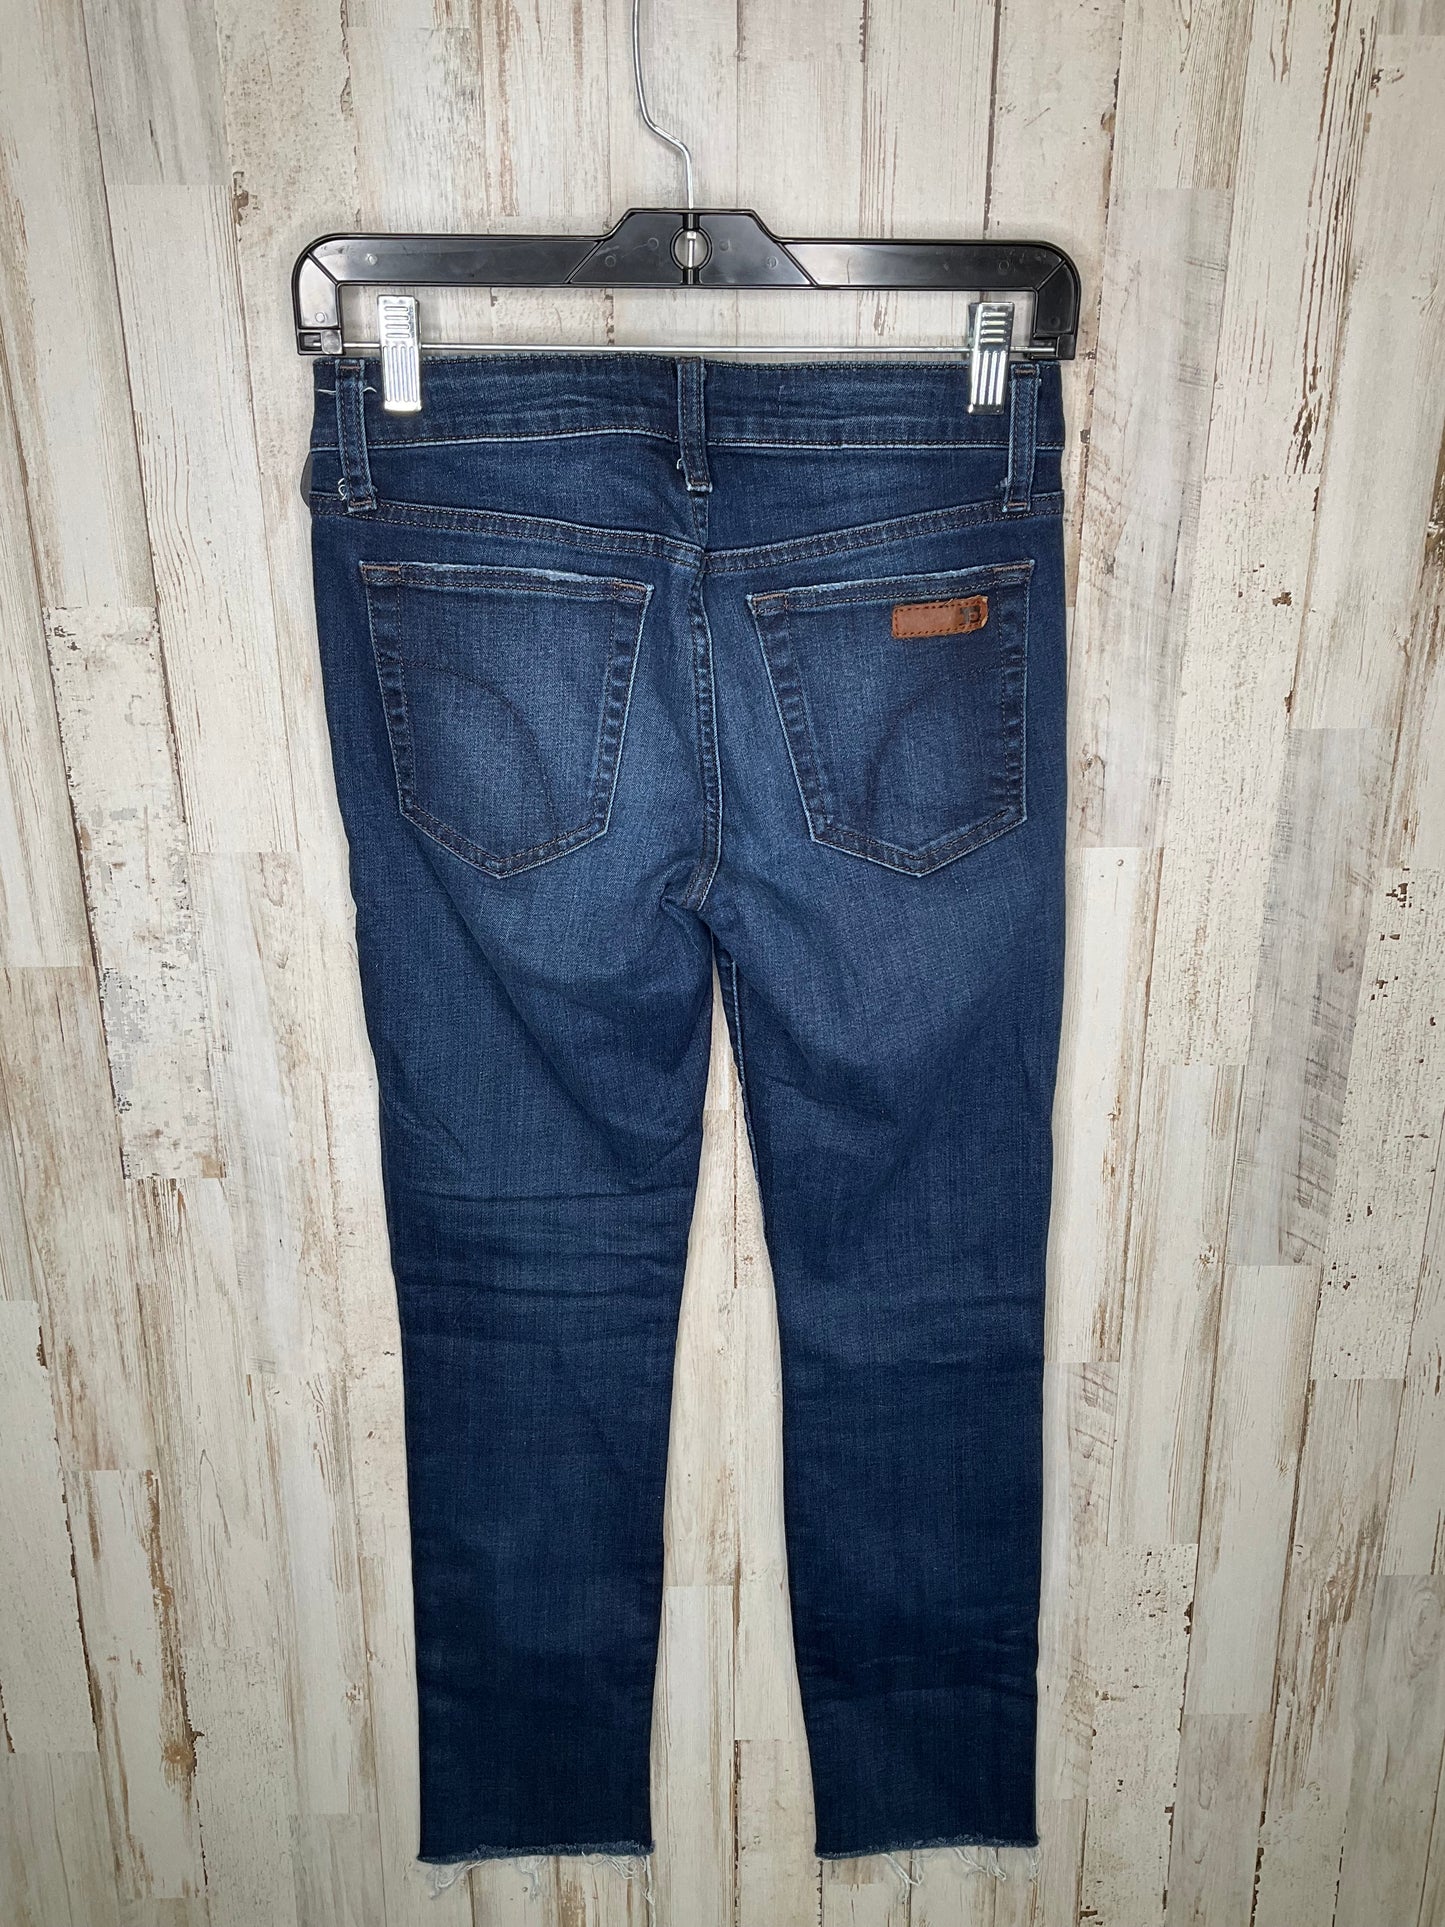 Jeans Skinny By Joes Jeans  Size: 2